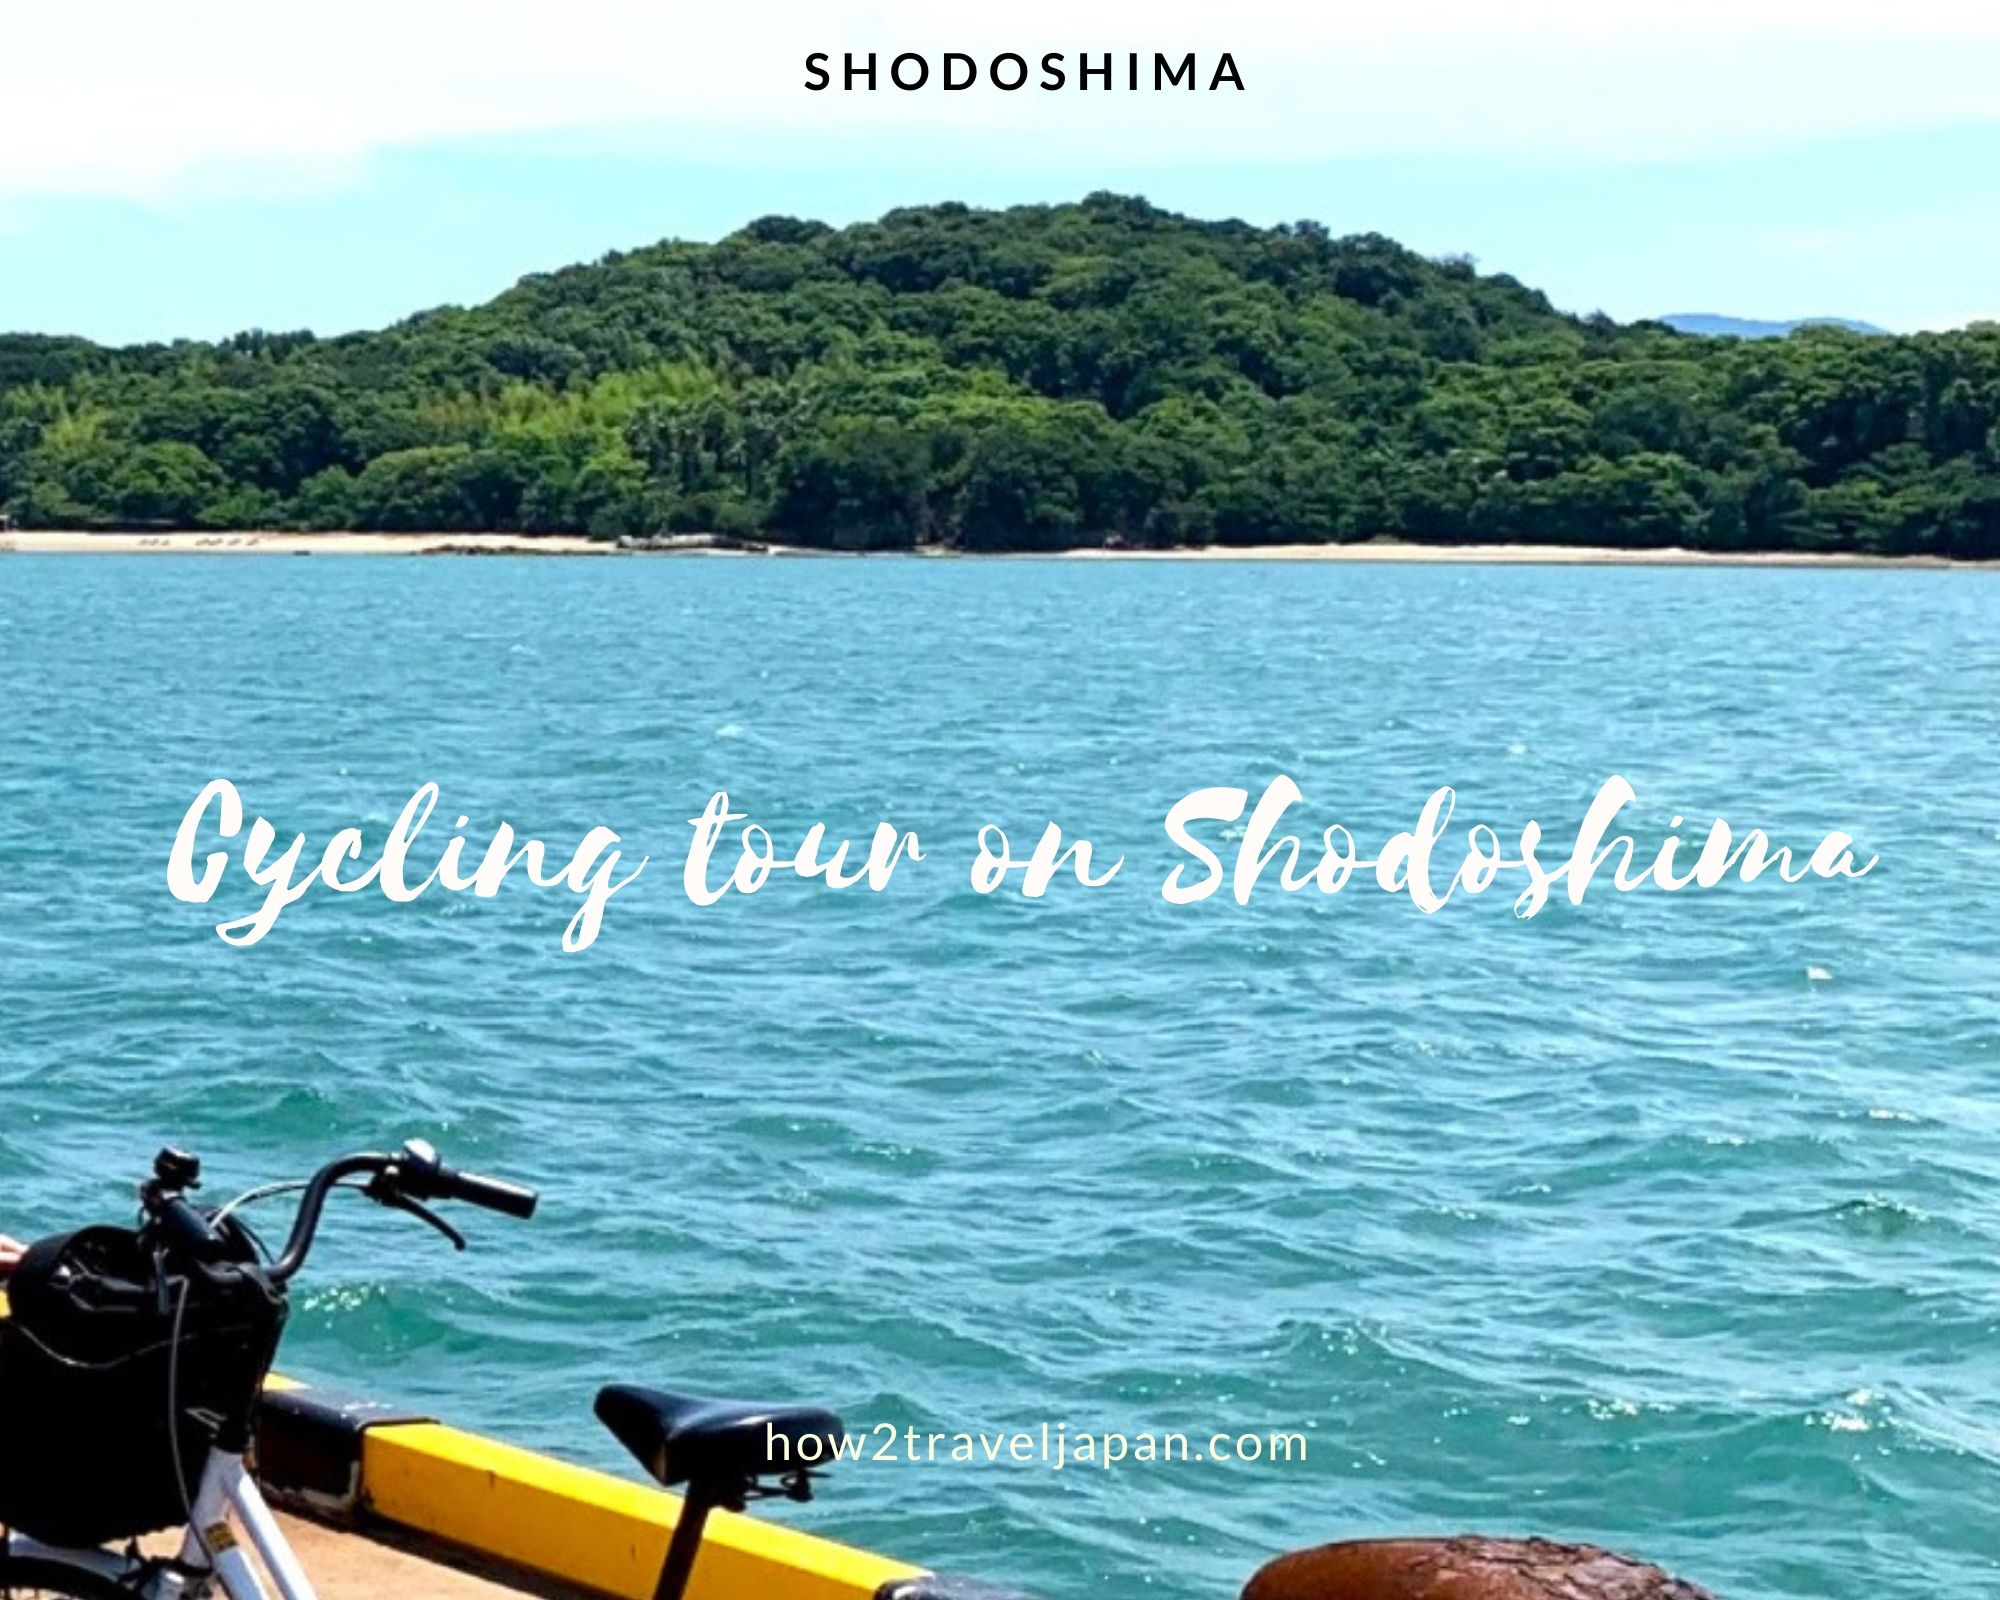 You are currently viewing Cycling tour on Shodoshima